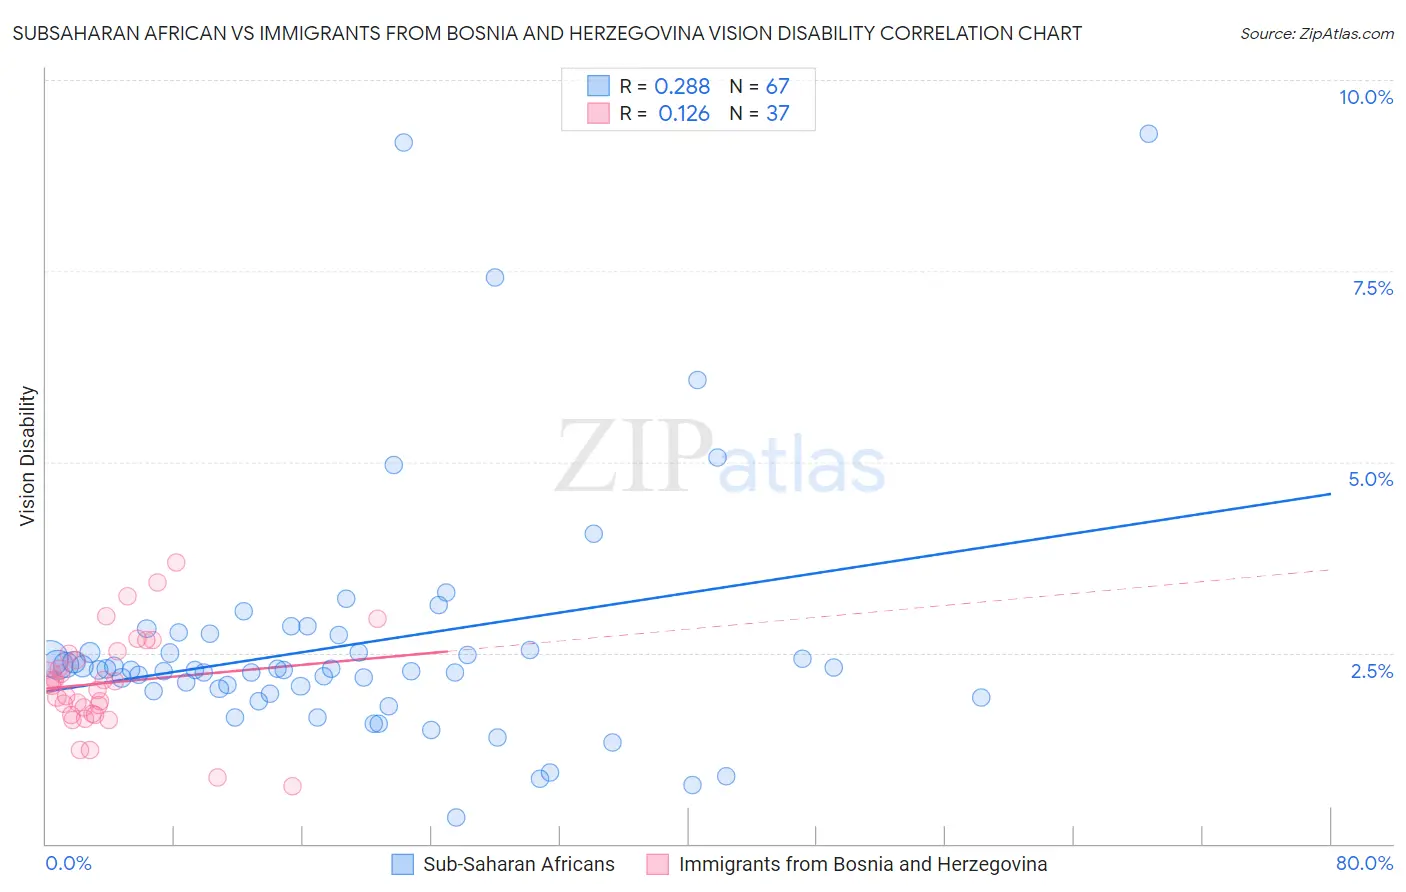 Subsaharan African vs Immigrants from Bosnia and Herzegovina Vision Disability